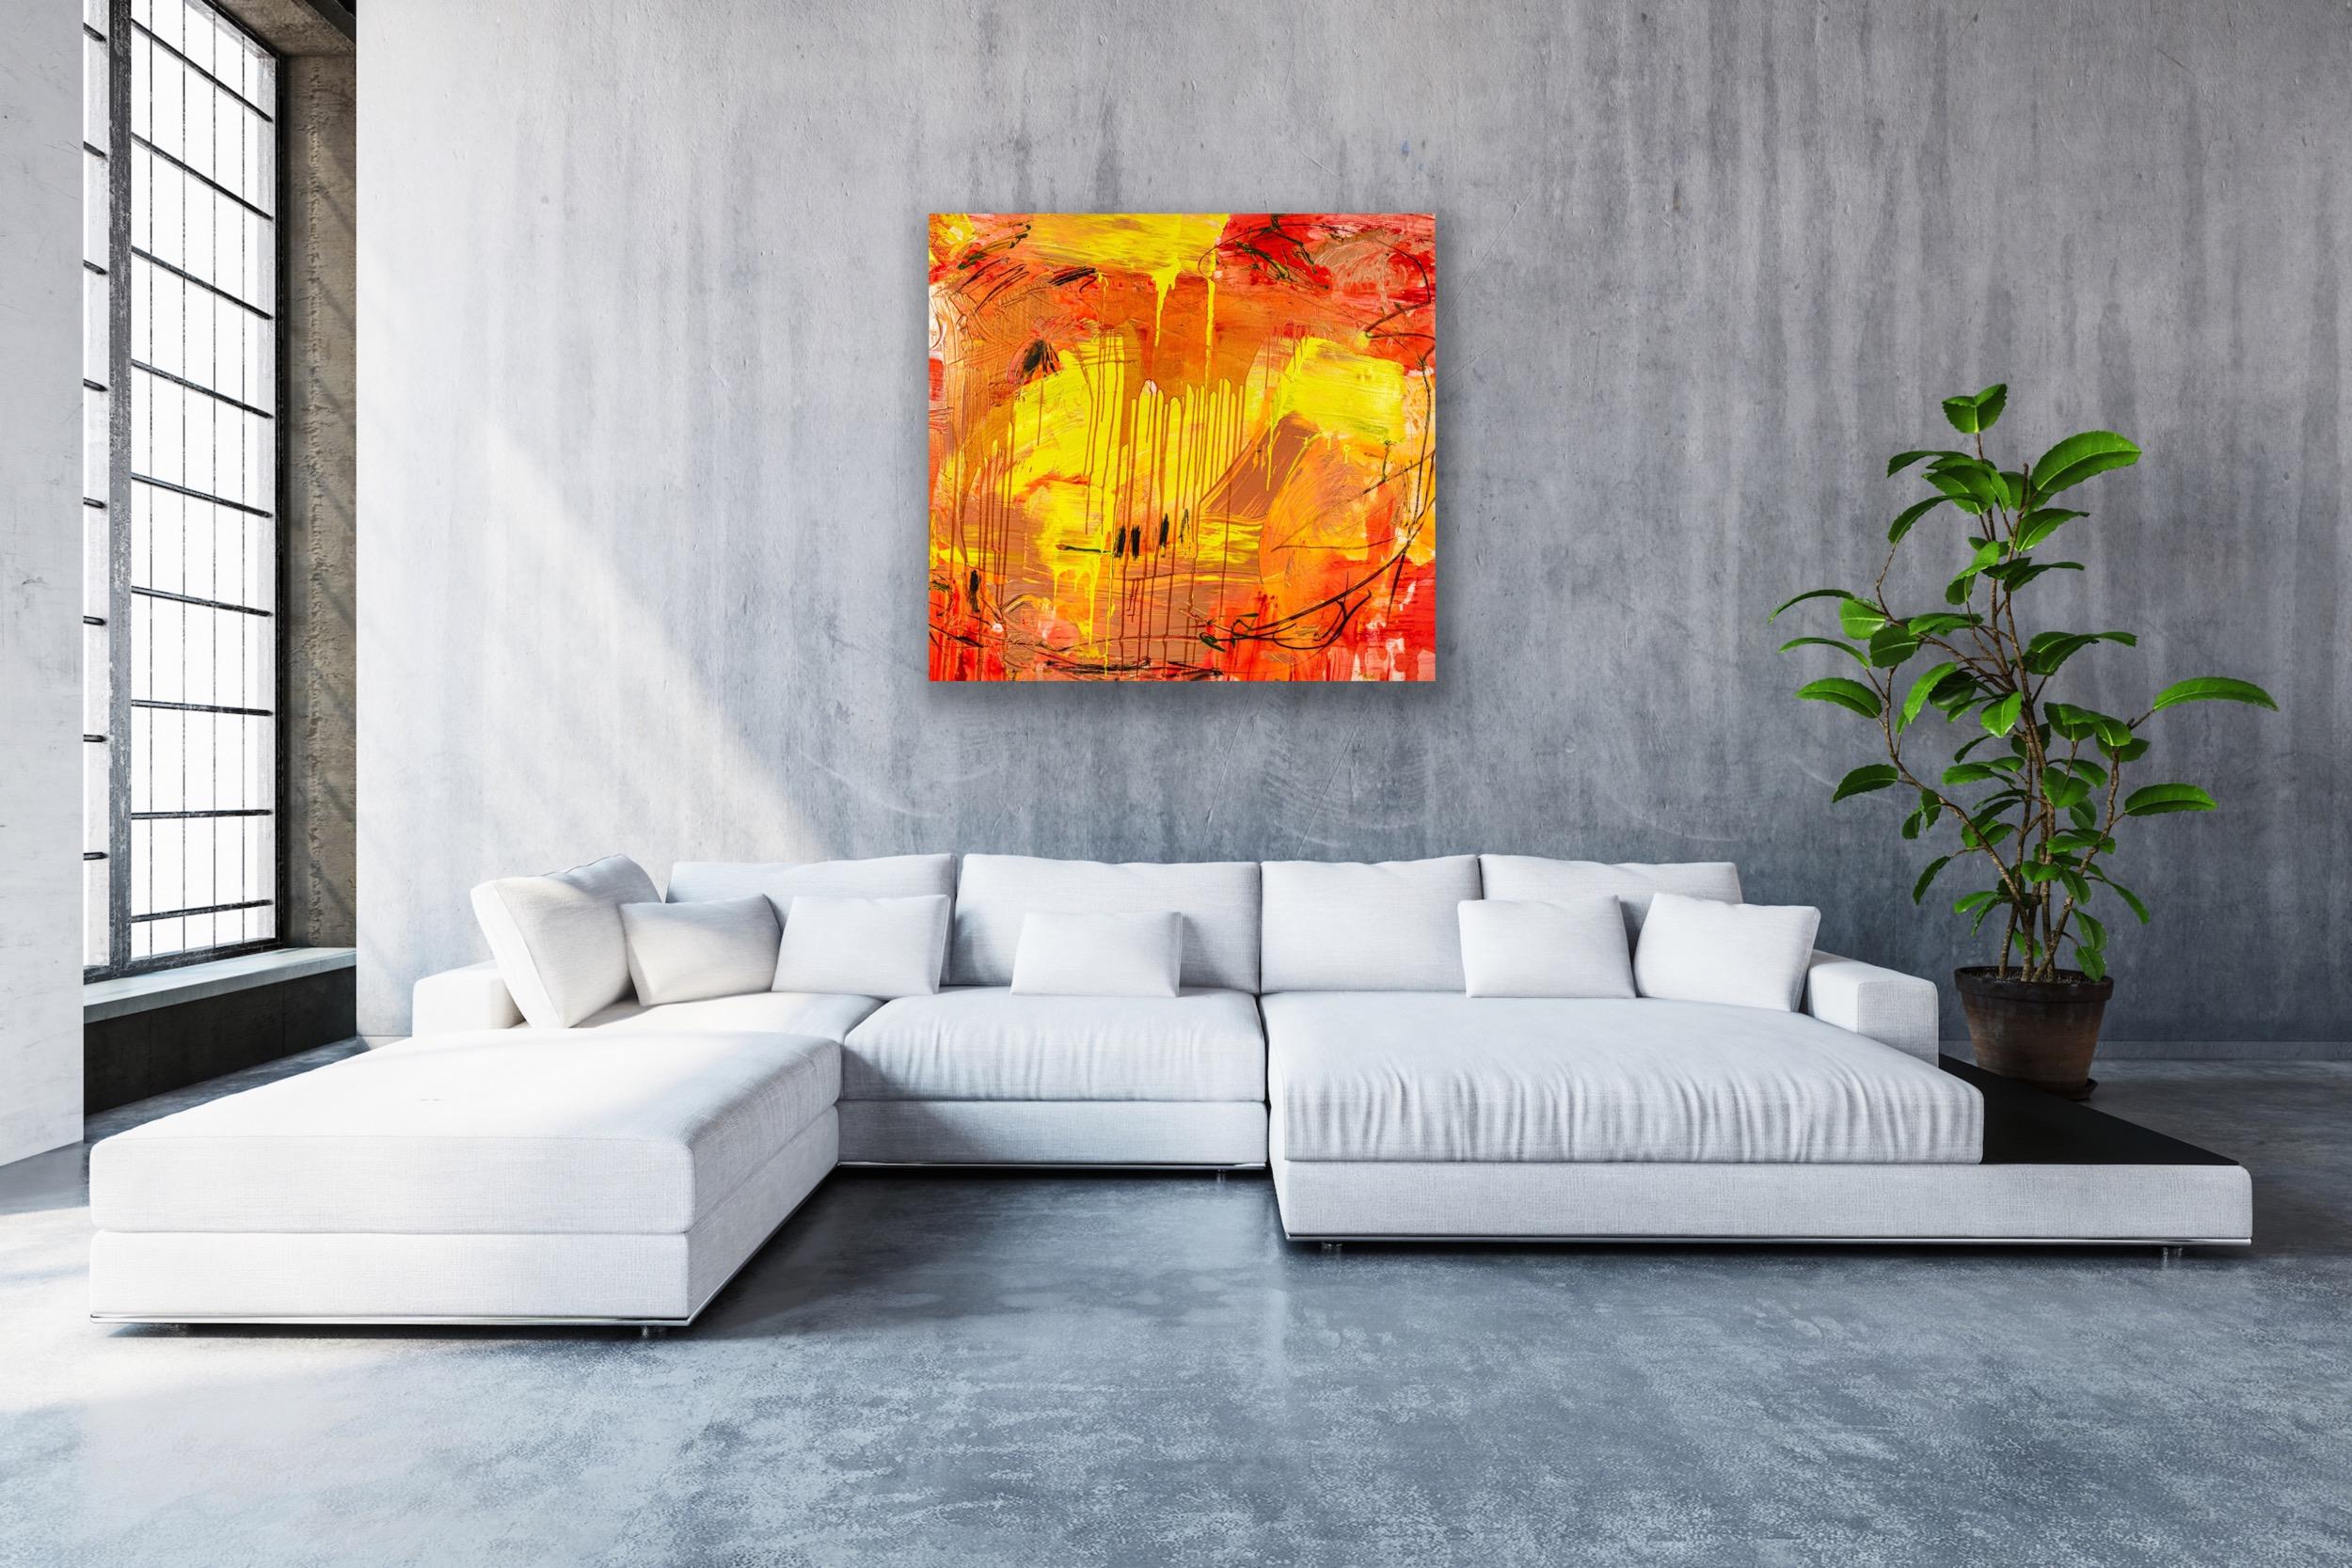 Temple Ruins - Abstract Expressionist Painting by Francine Tint